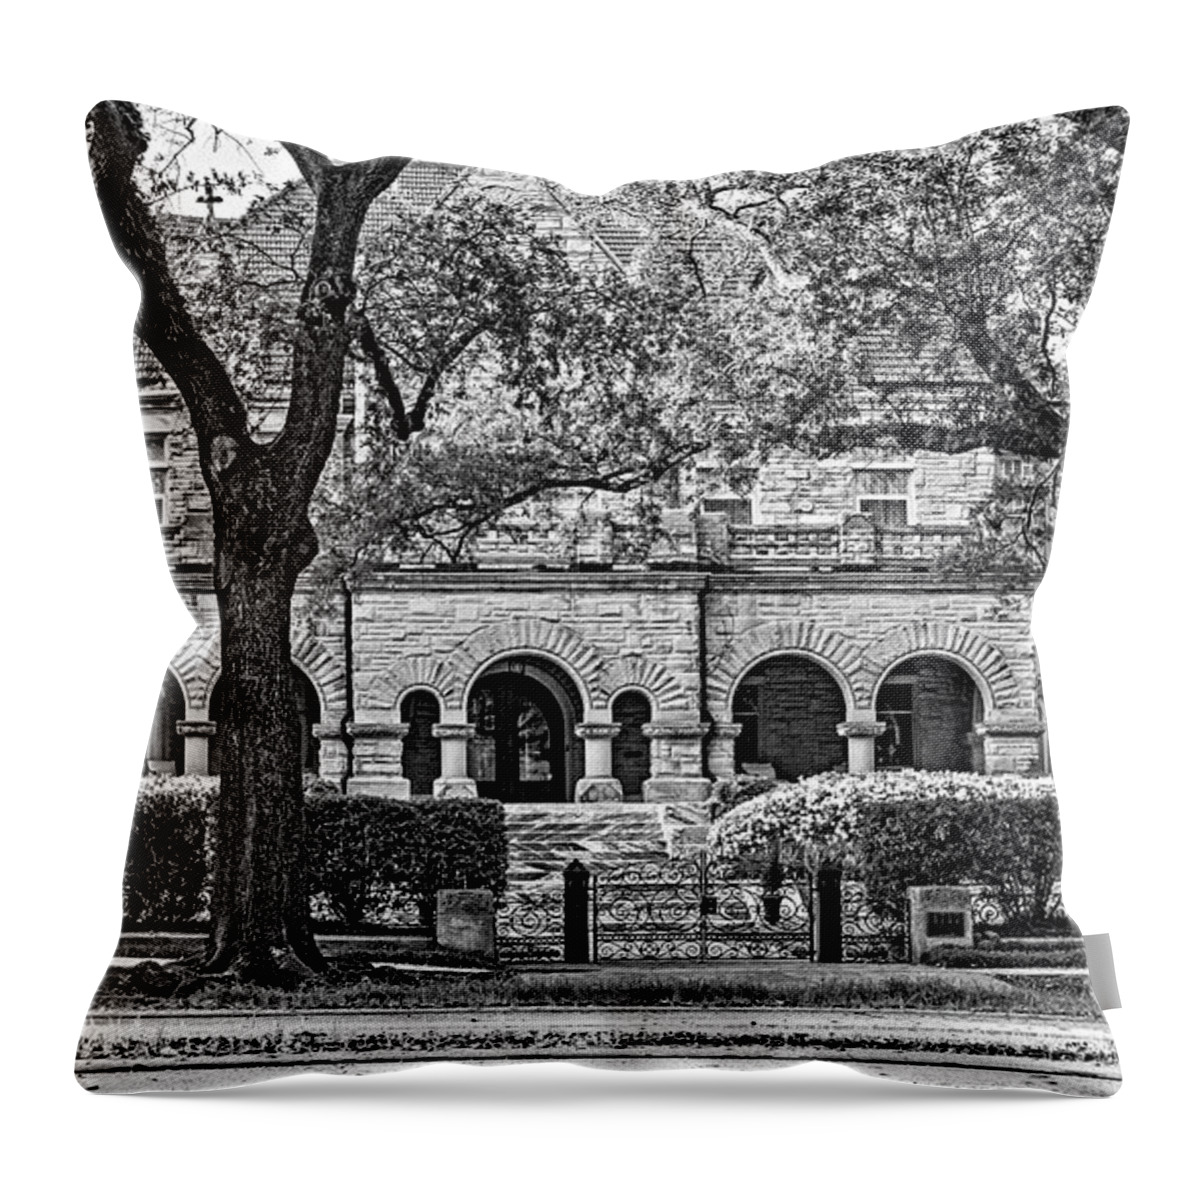 Home Throw Pillow featuring the photograph Sweet Home New Orleans - Arches And Stone bw by Steve Harrington